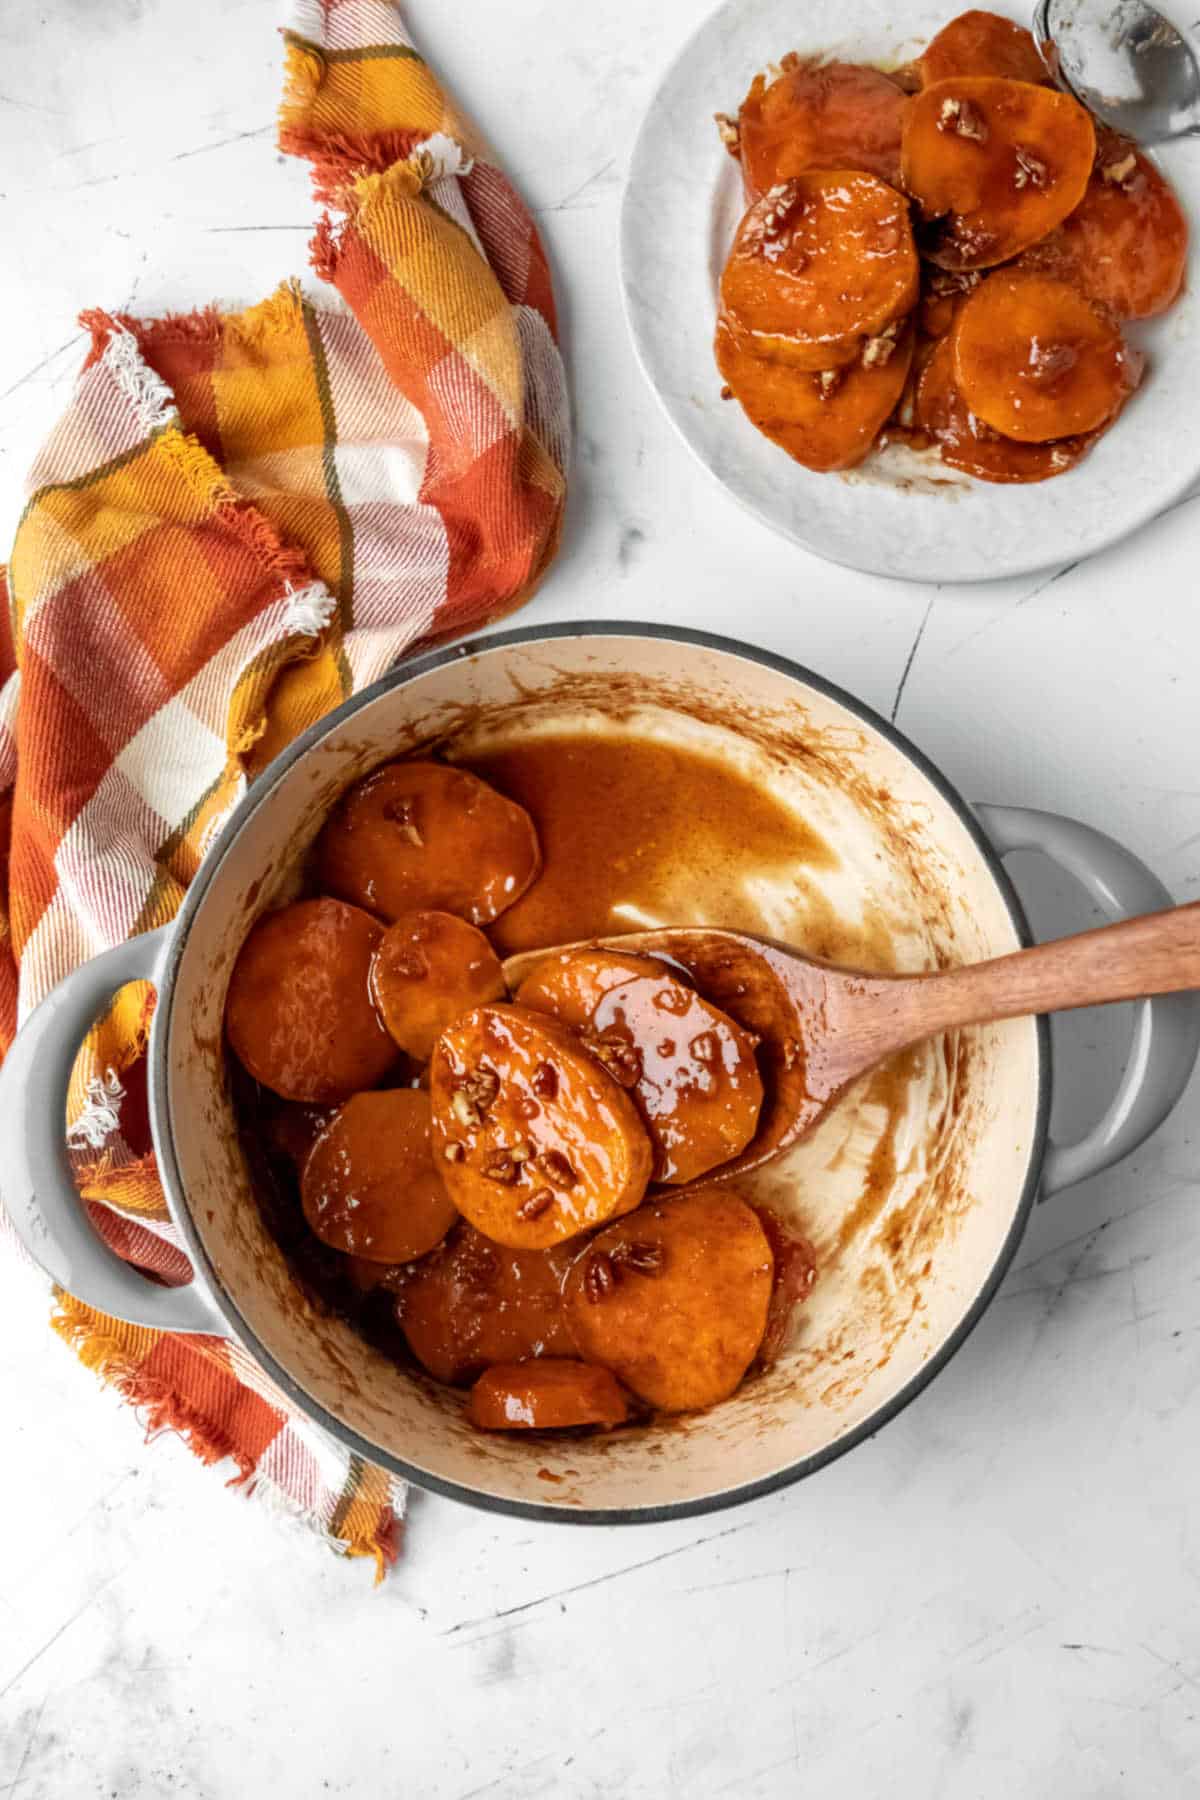 Dutch oven with candied sweet potatoes next to a plate of candied sweet potatoes.